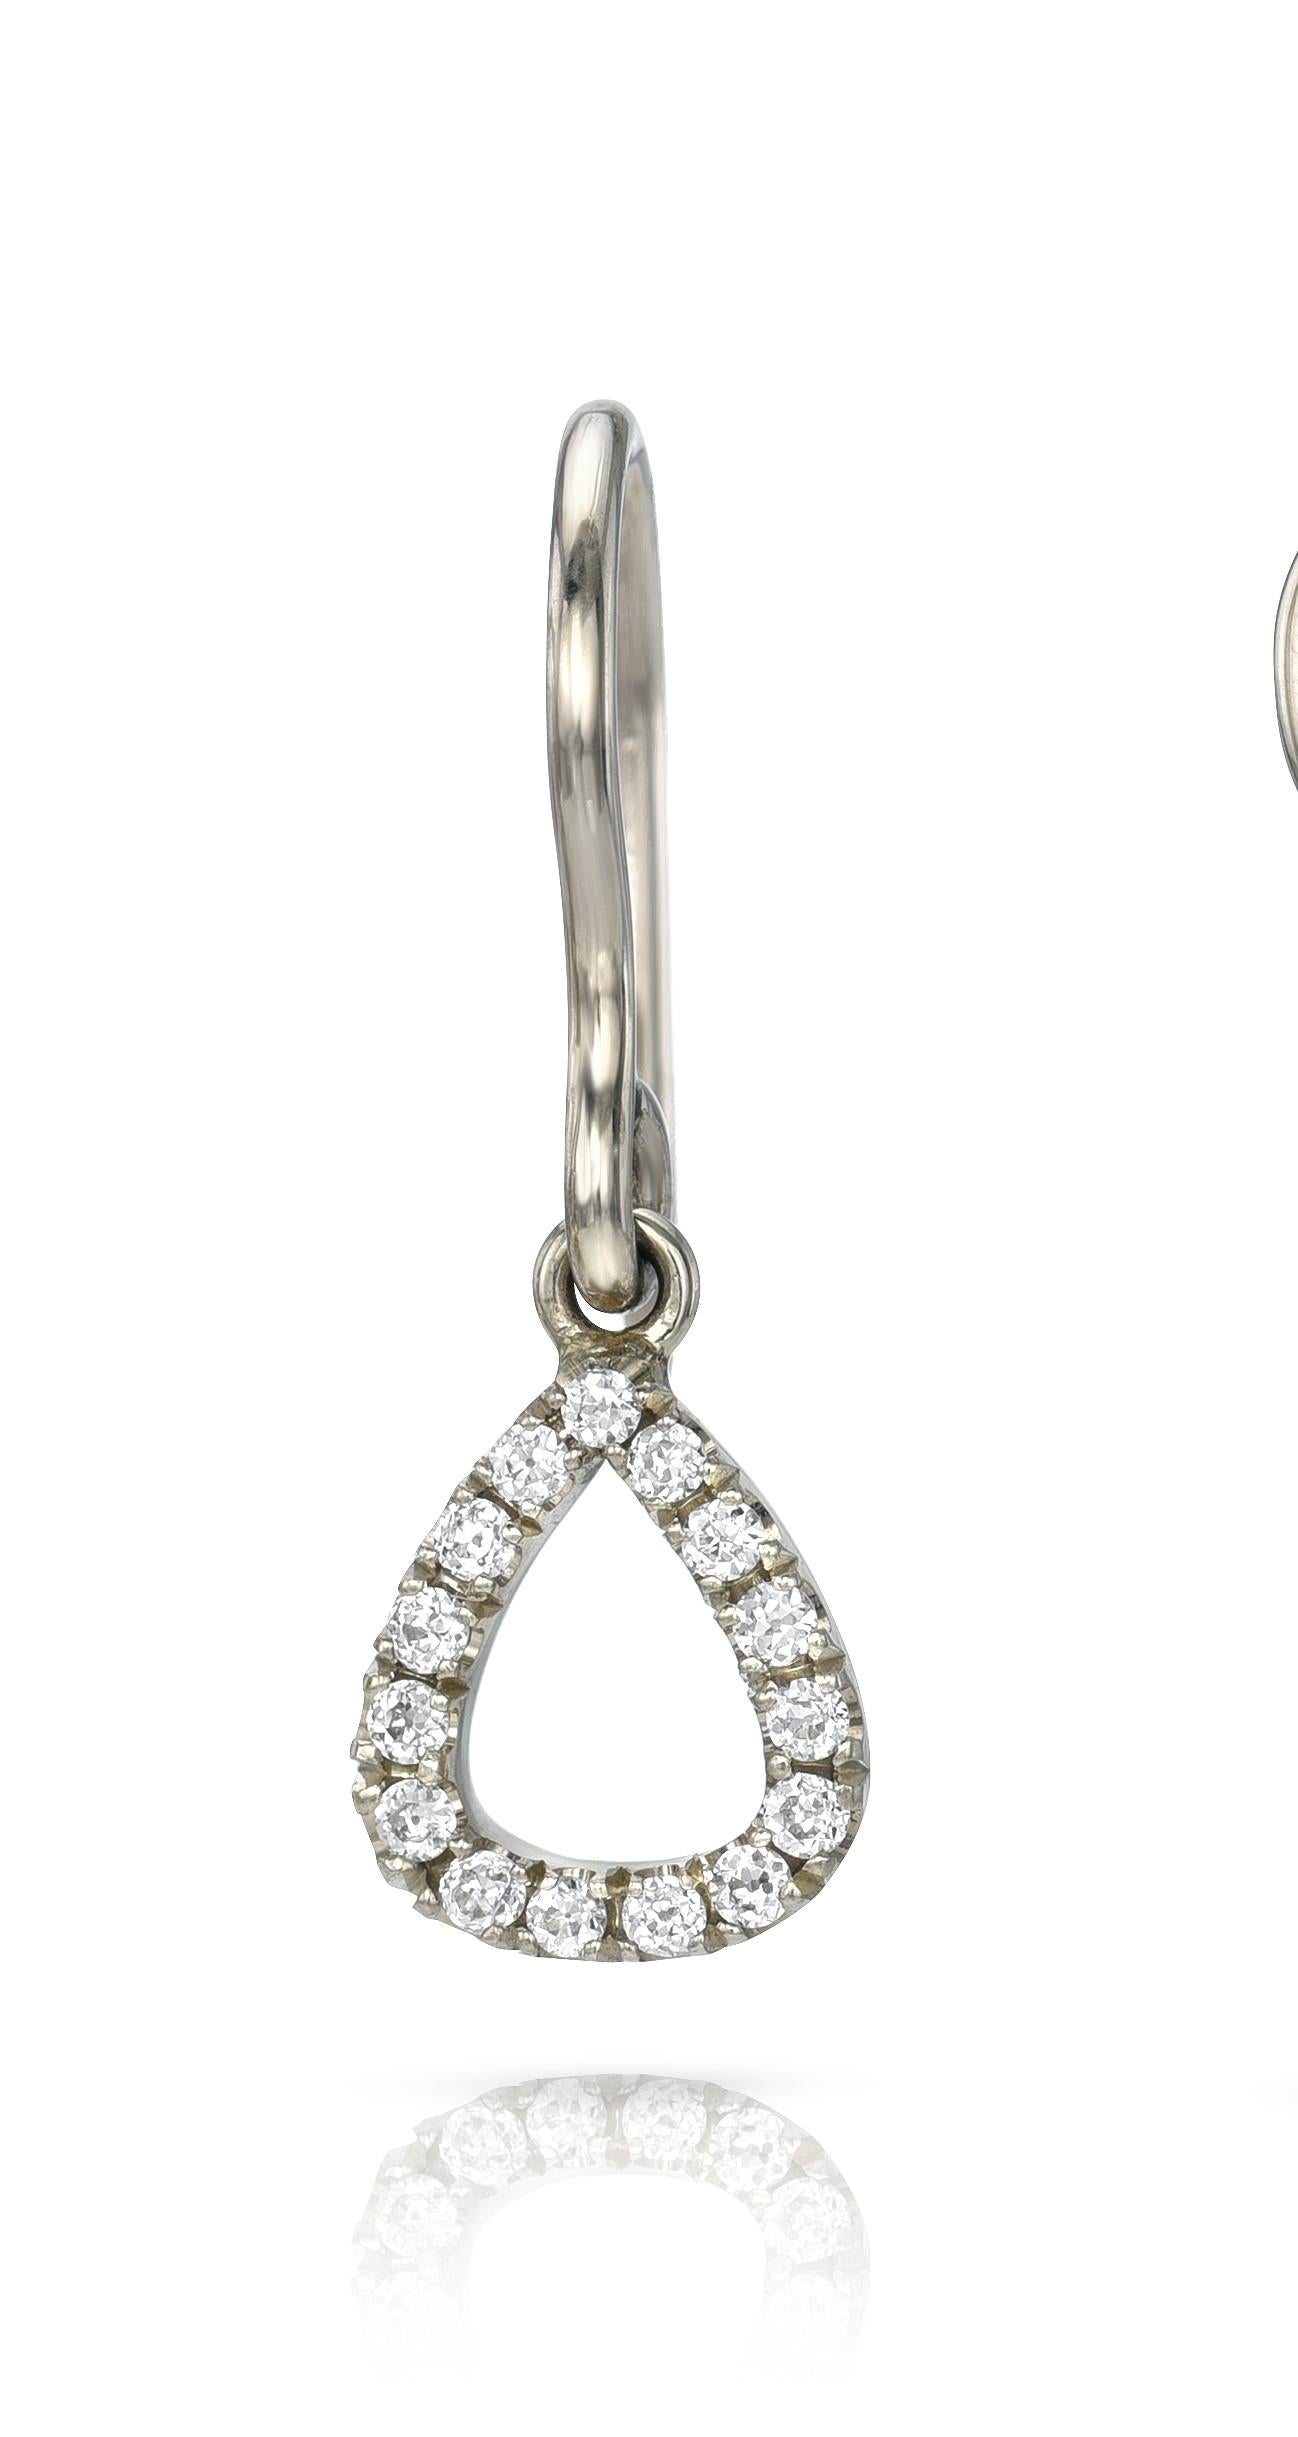 Handcrafted 18K champagne white gold drop earrings with 0.16ctw old European cut accent diamonds.